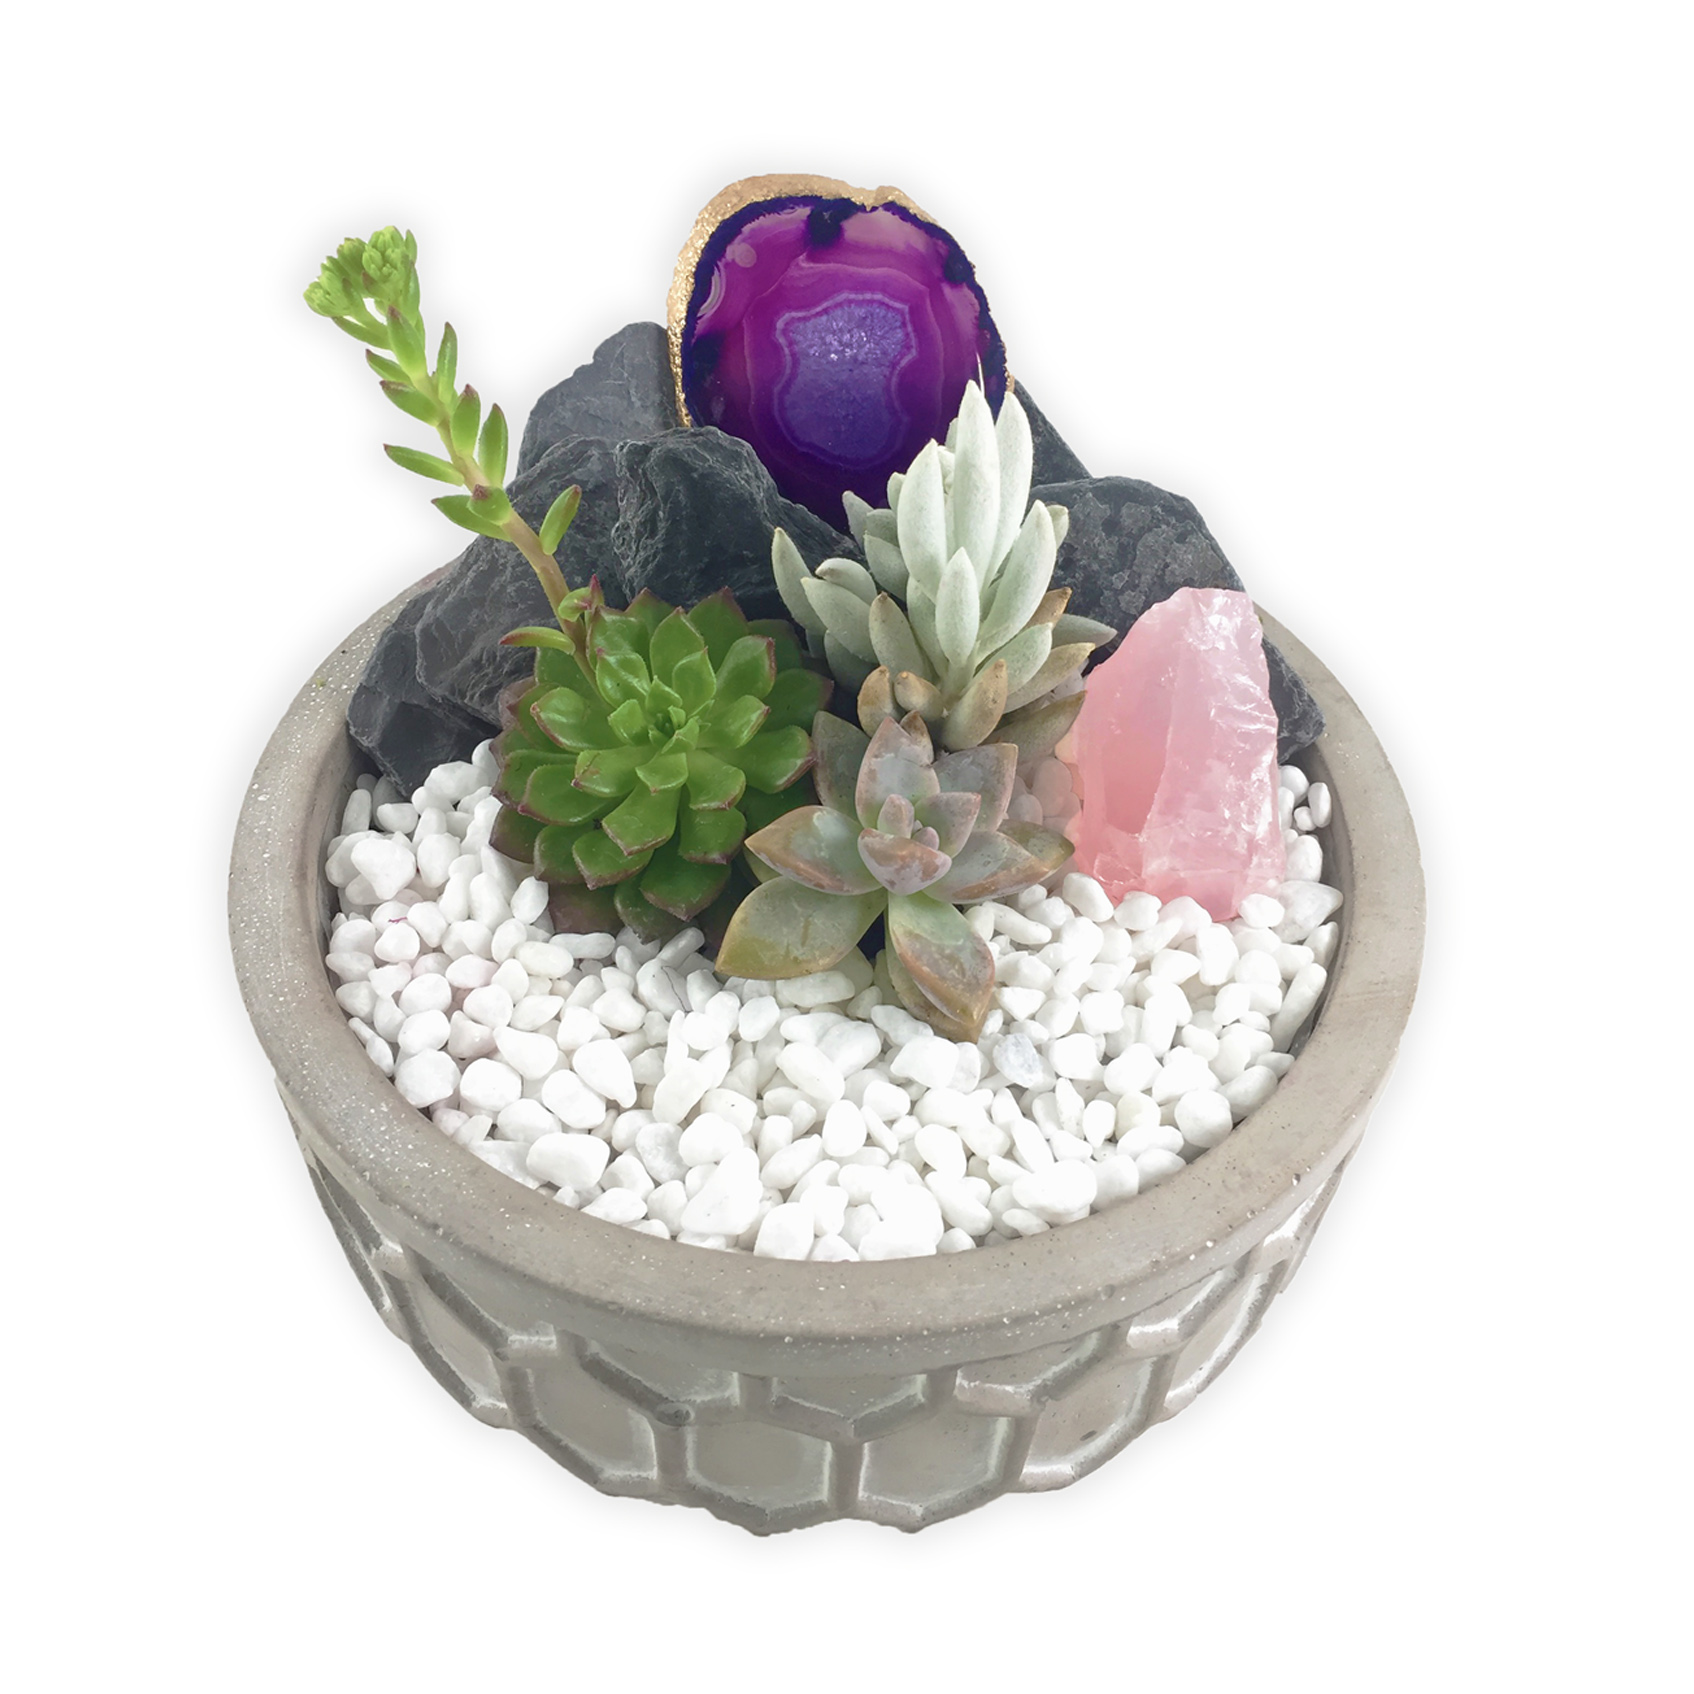 A Agate Slices and Rose Quartz Terrarium in Concrete Planter  SPECIAL PROJECT plant nite project by Yaymaker